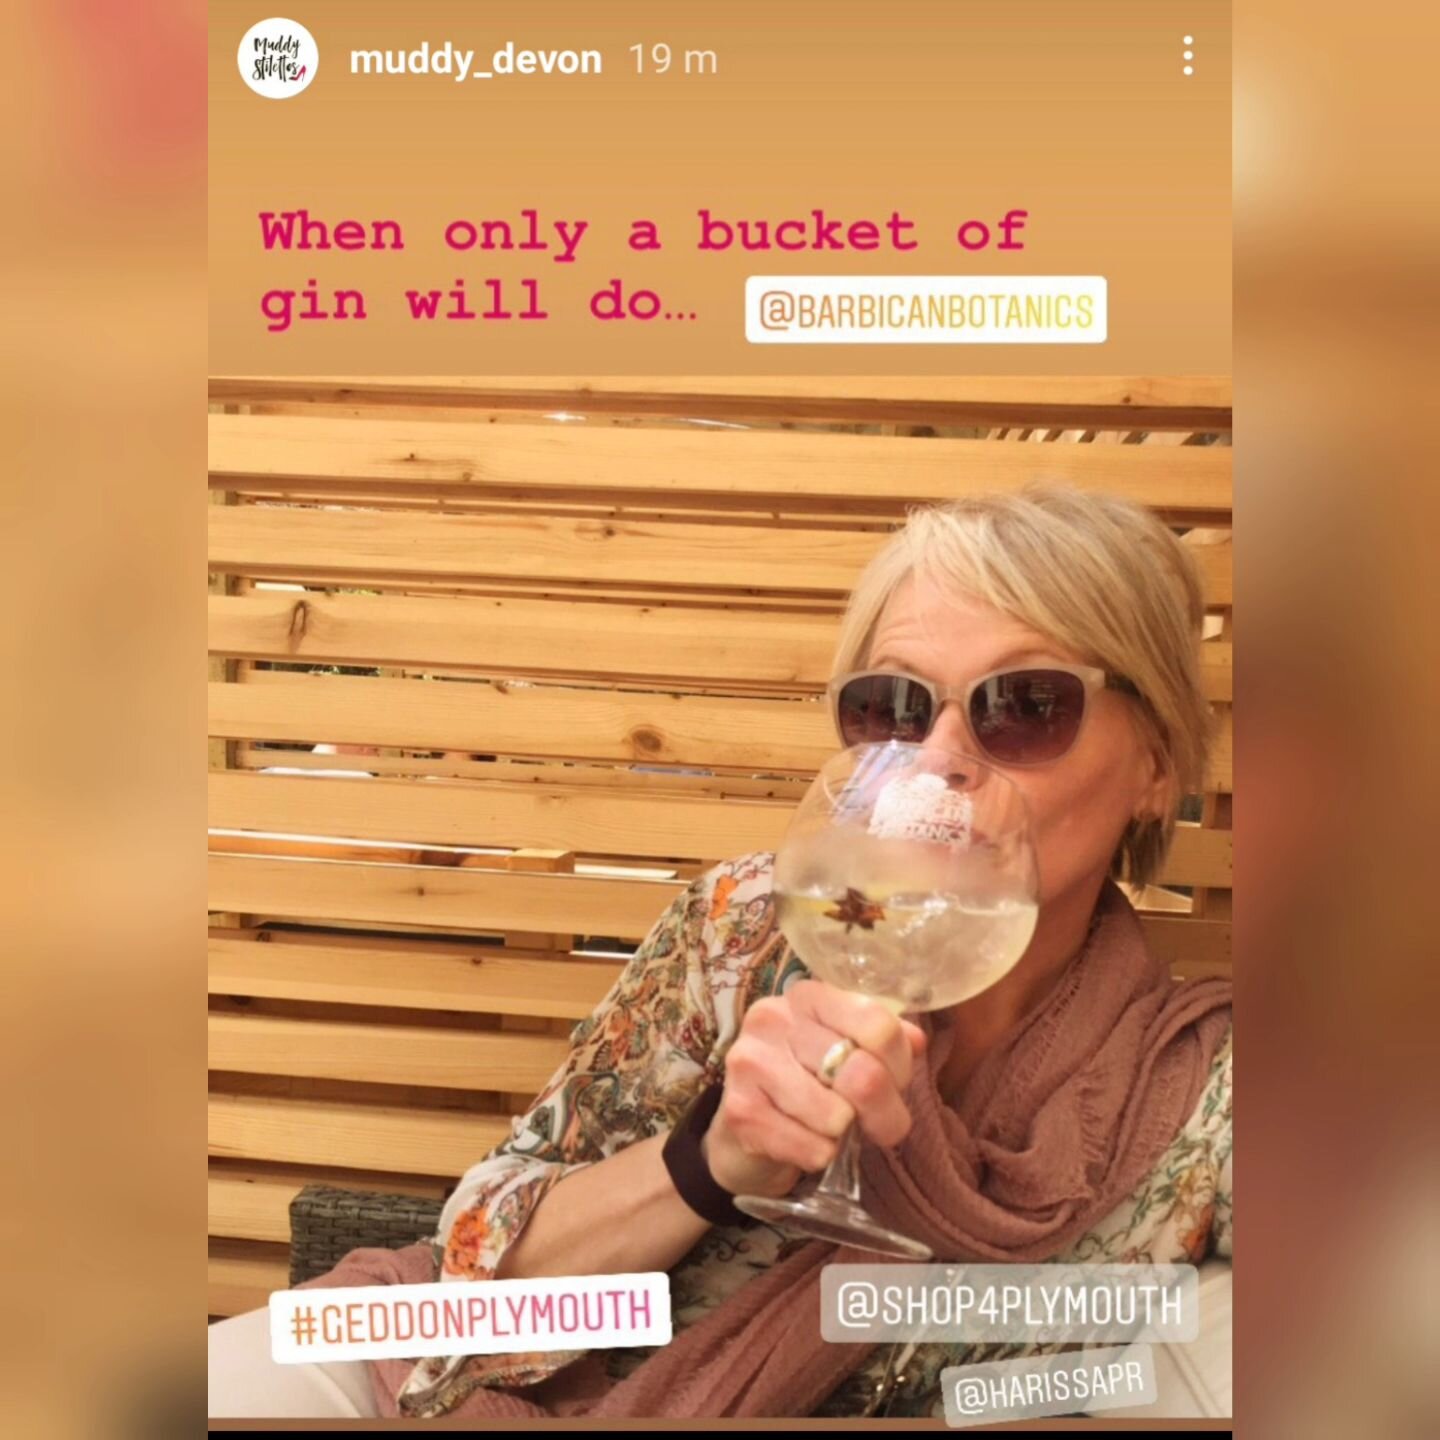 A fabulous throwback Gin and Tonic courtesy of @muddy_devon and @barbicanbotanics - a collaboration with @visitplymouth highlighting @britainsoceancity - as part of a wider Instagram campaign coordinated by @harissapr

We've collaborated on several i